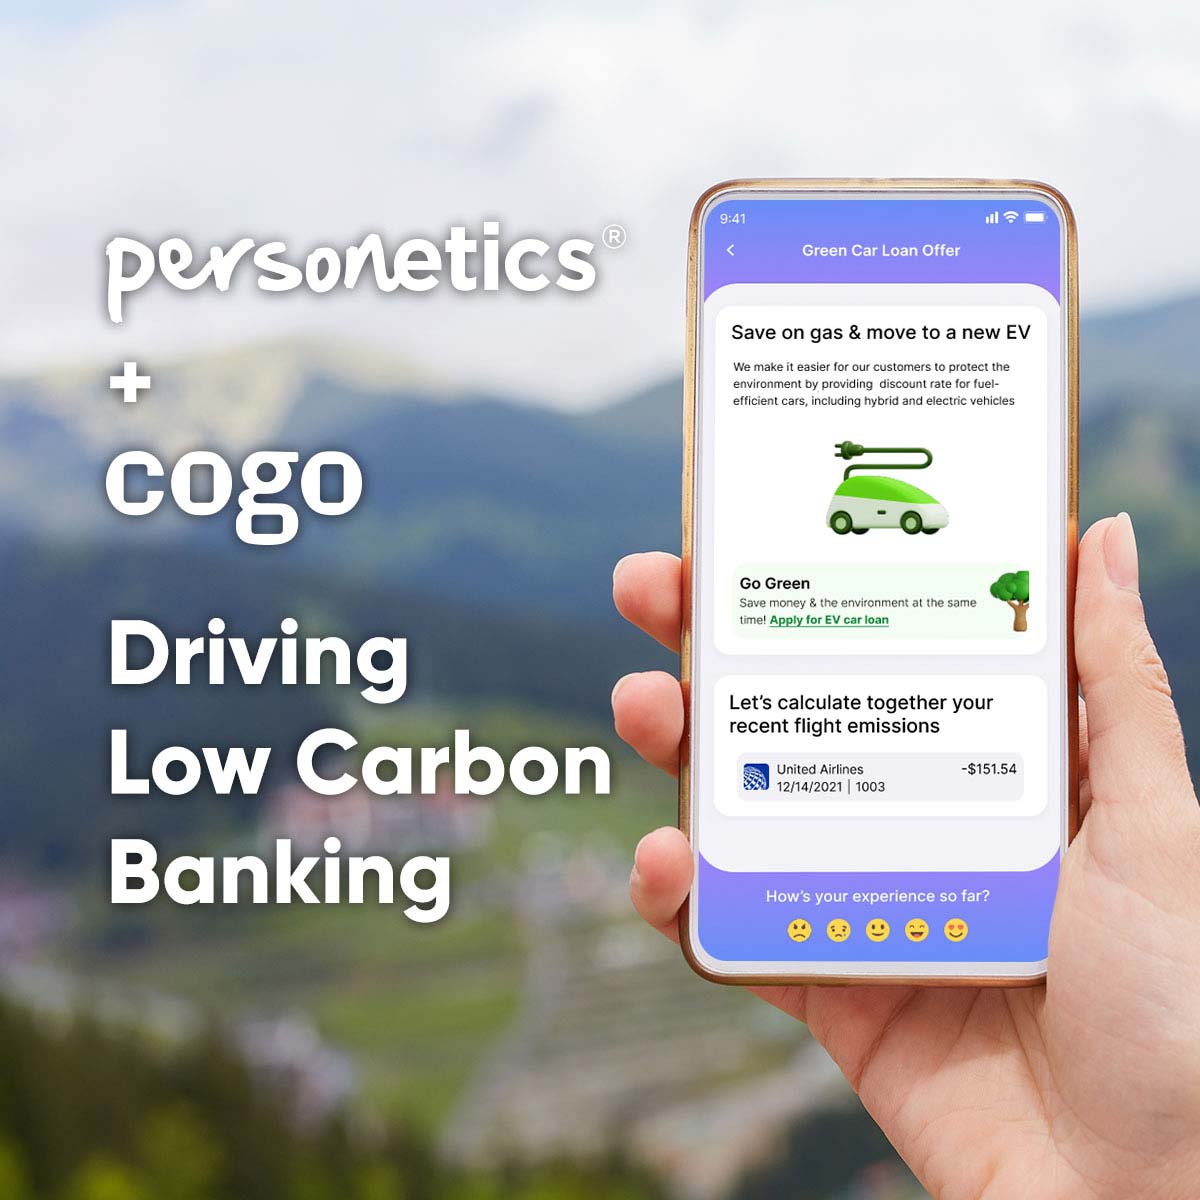 We're excited to announce that @personetics has partnered with Cogo to integrate personalized climate action insights directly into the banking experience! >> hubs.ly/Q02t14Wr0 #BankingNews #BankingIndustry #BankingExperience #CarbonFootprint #SustainabilityInsights